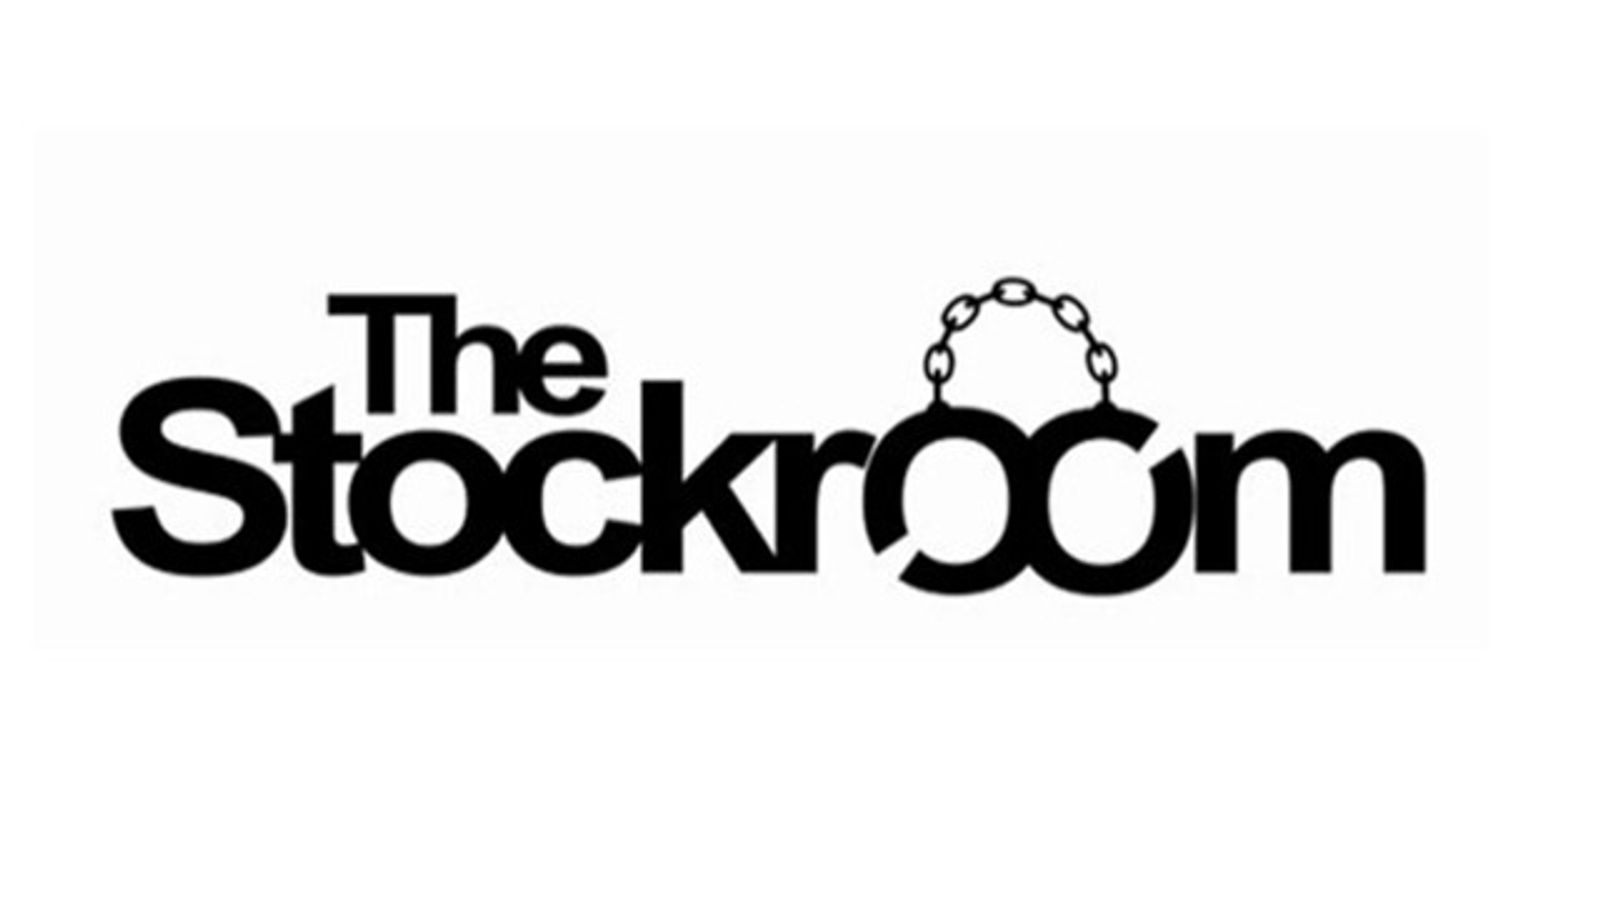 The Stockroom Brings The Dungeon Experience to Exxxotica Expo